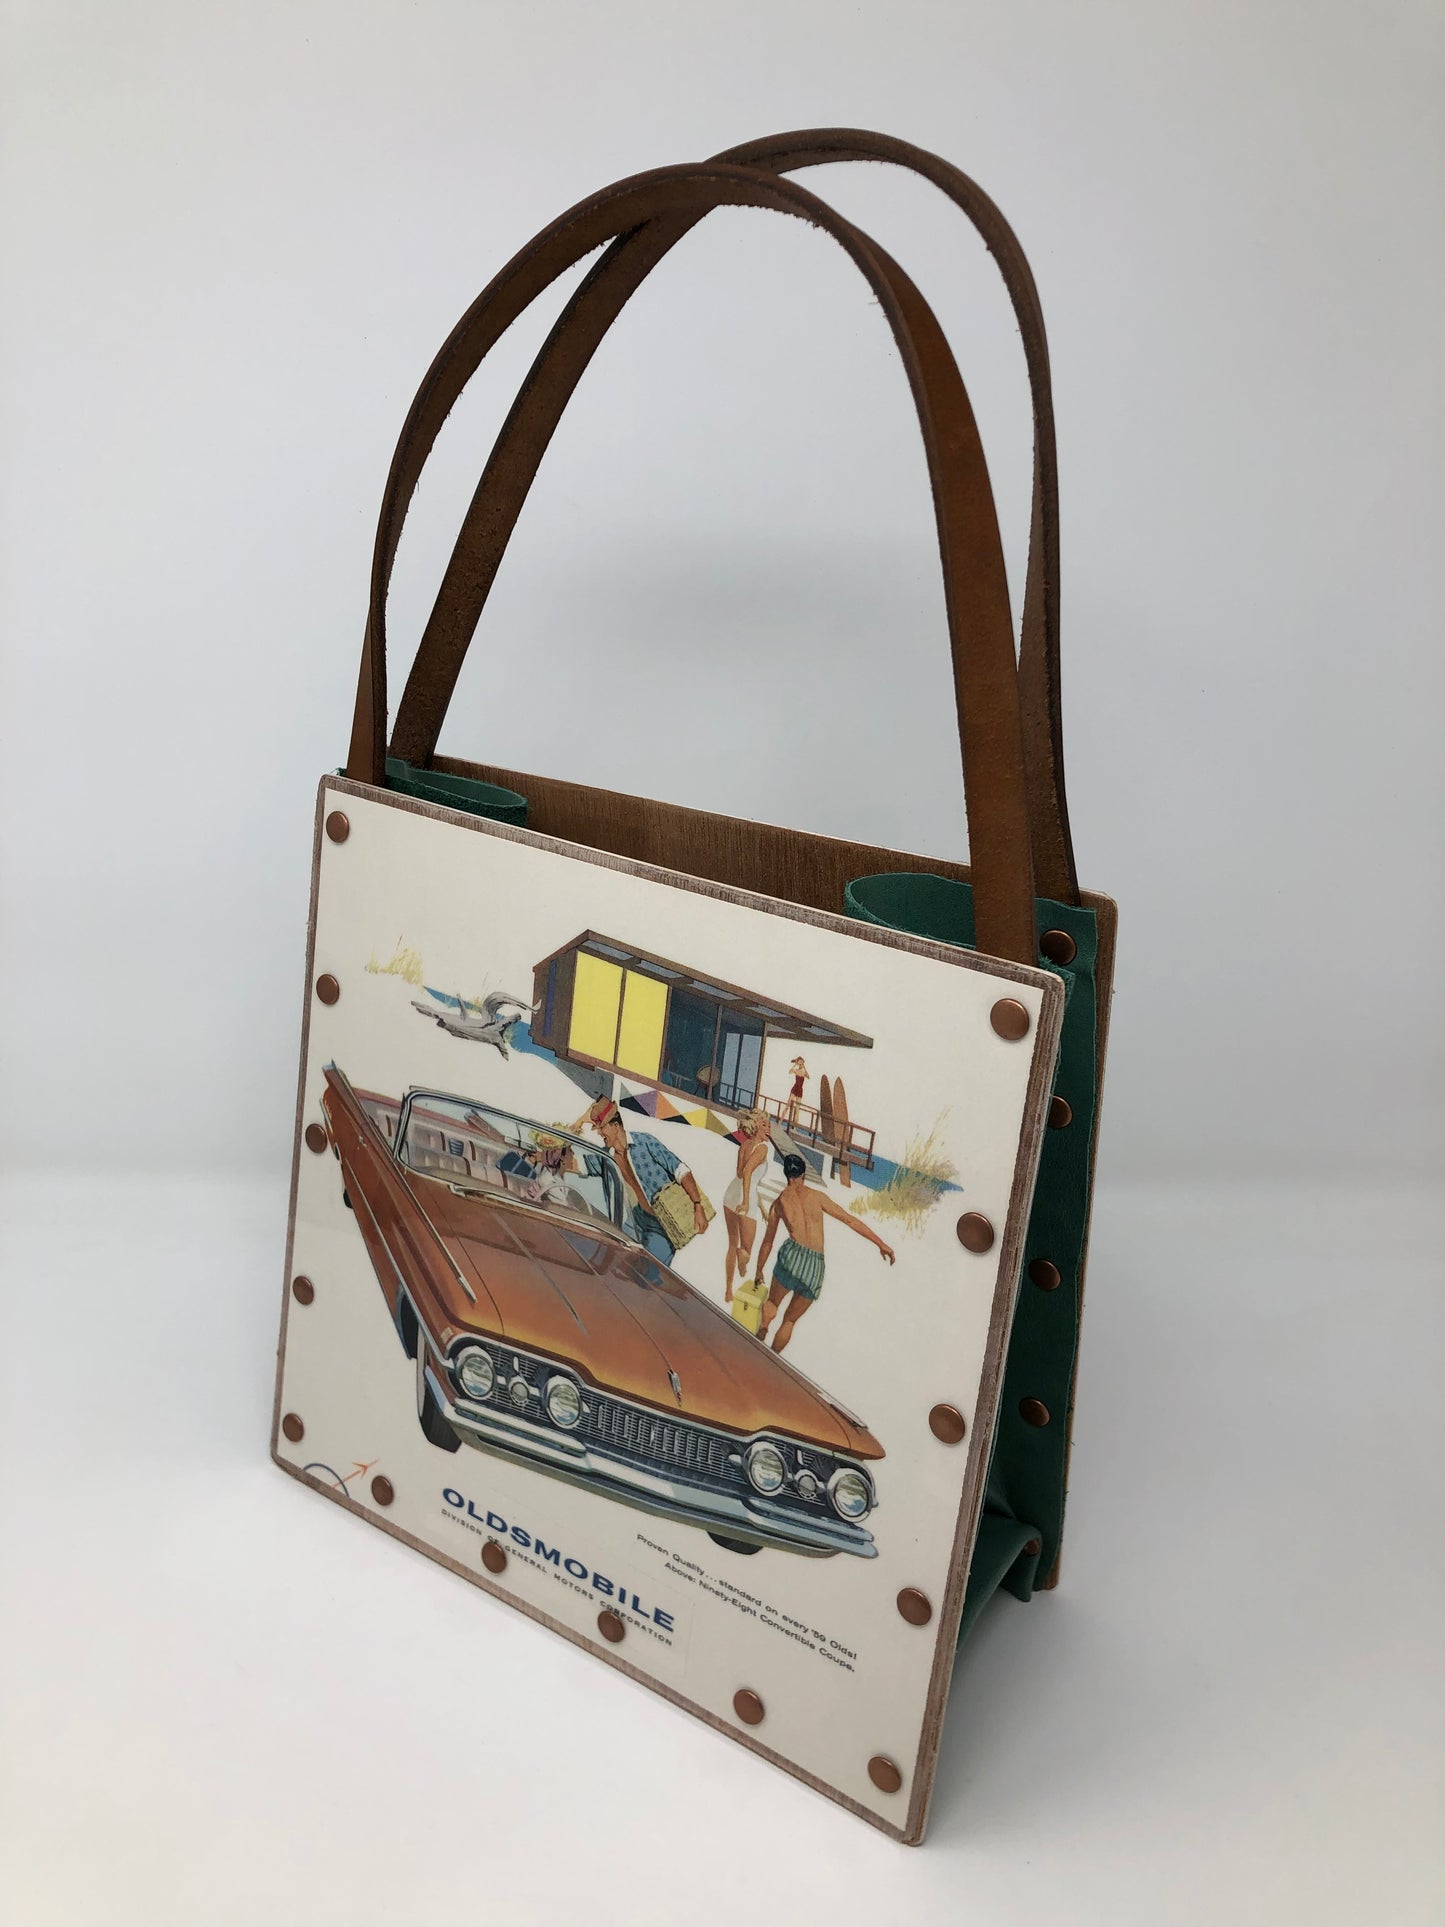 Vintage Graphics Handbag - Beach Vibes Ray Ban and Oldsmobile Ads from Vogue 1959